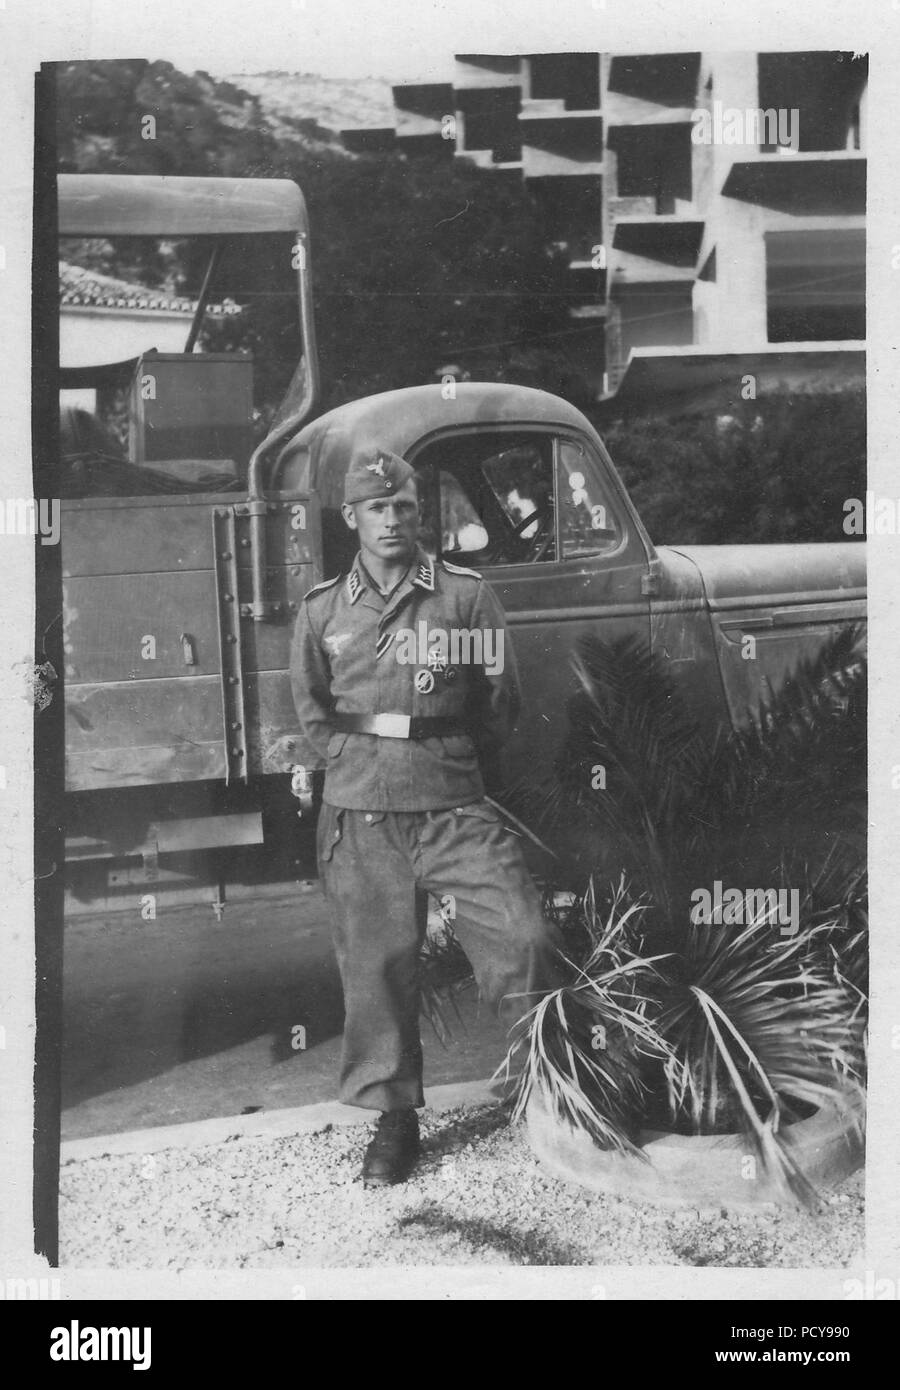 Feldwebel Otto Thomas of 3. Kompanie, Fallschirmjäger-Regiment 2, pictured in summer 1940, stands in front of a truck belonging to his unit. He is wearing his Iron Cross 1st Class, Luftwaffe Paratrooper Award Badge, Black Wound Badge and ribbon to the Iron Cross 2nd Class. On dress occasions, Thomas wore his original Army Paratrooper Badge and it seems he wore the Luftwaffe version for everyday use. Stock Photo